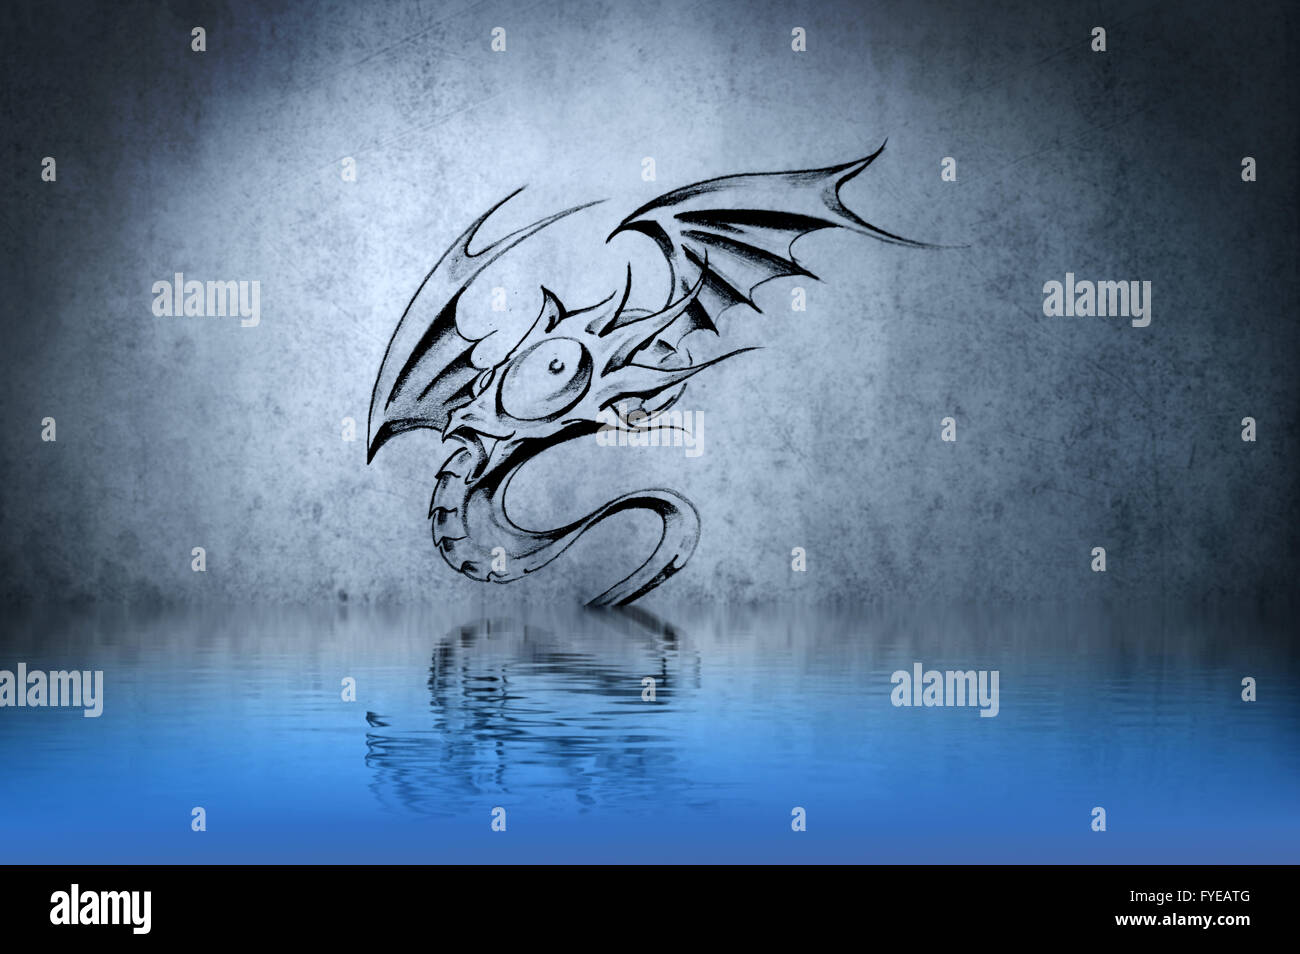 3168 Water Dragon Tattoo Images Stock Photos  Vectors  Shutterstock